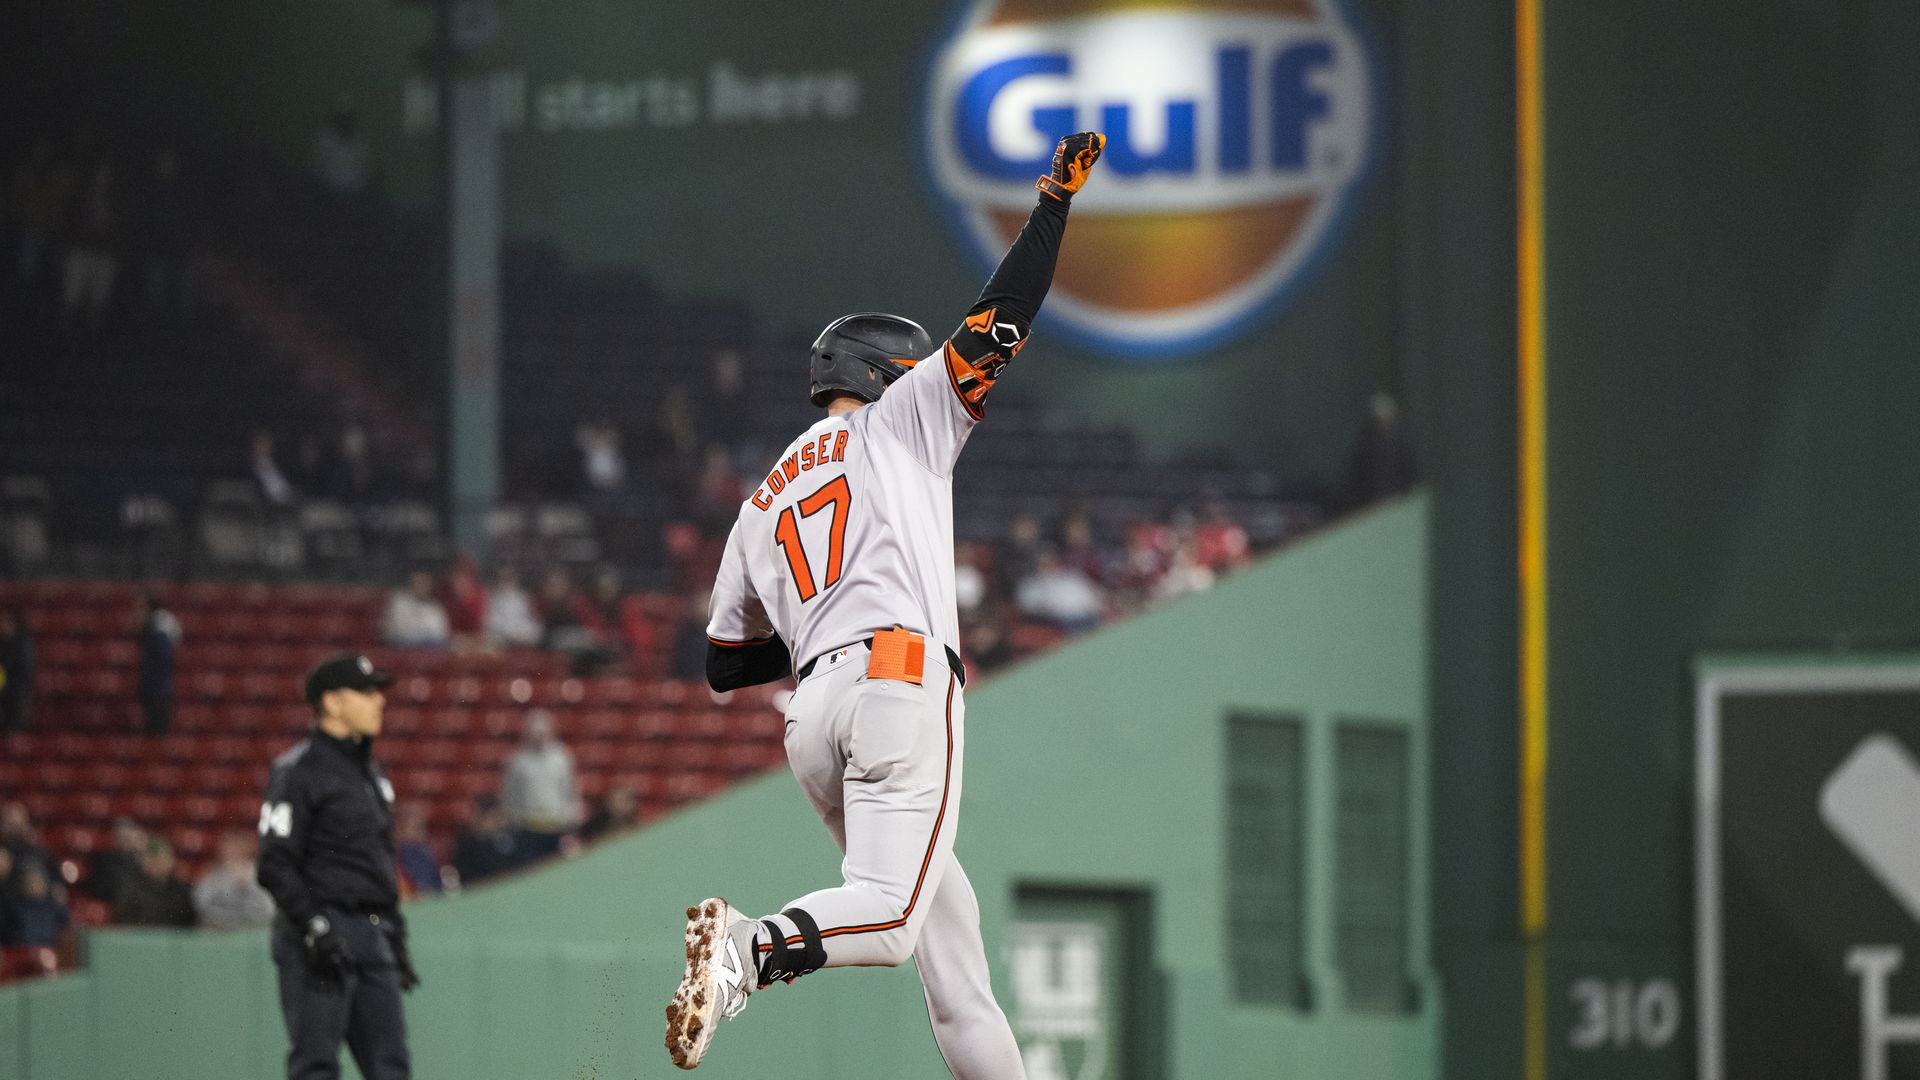 orioles triumph in another wacky fenway park special with 9-4 win over red sox